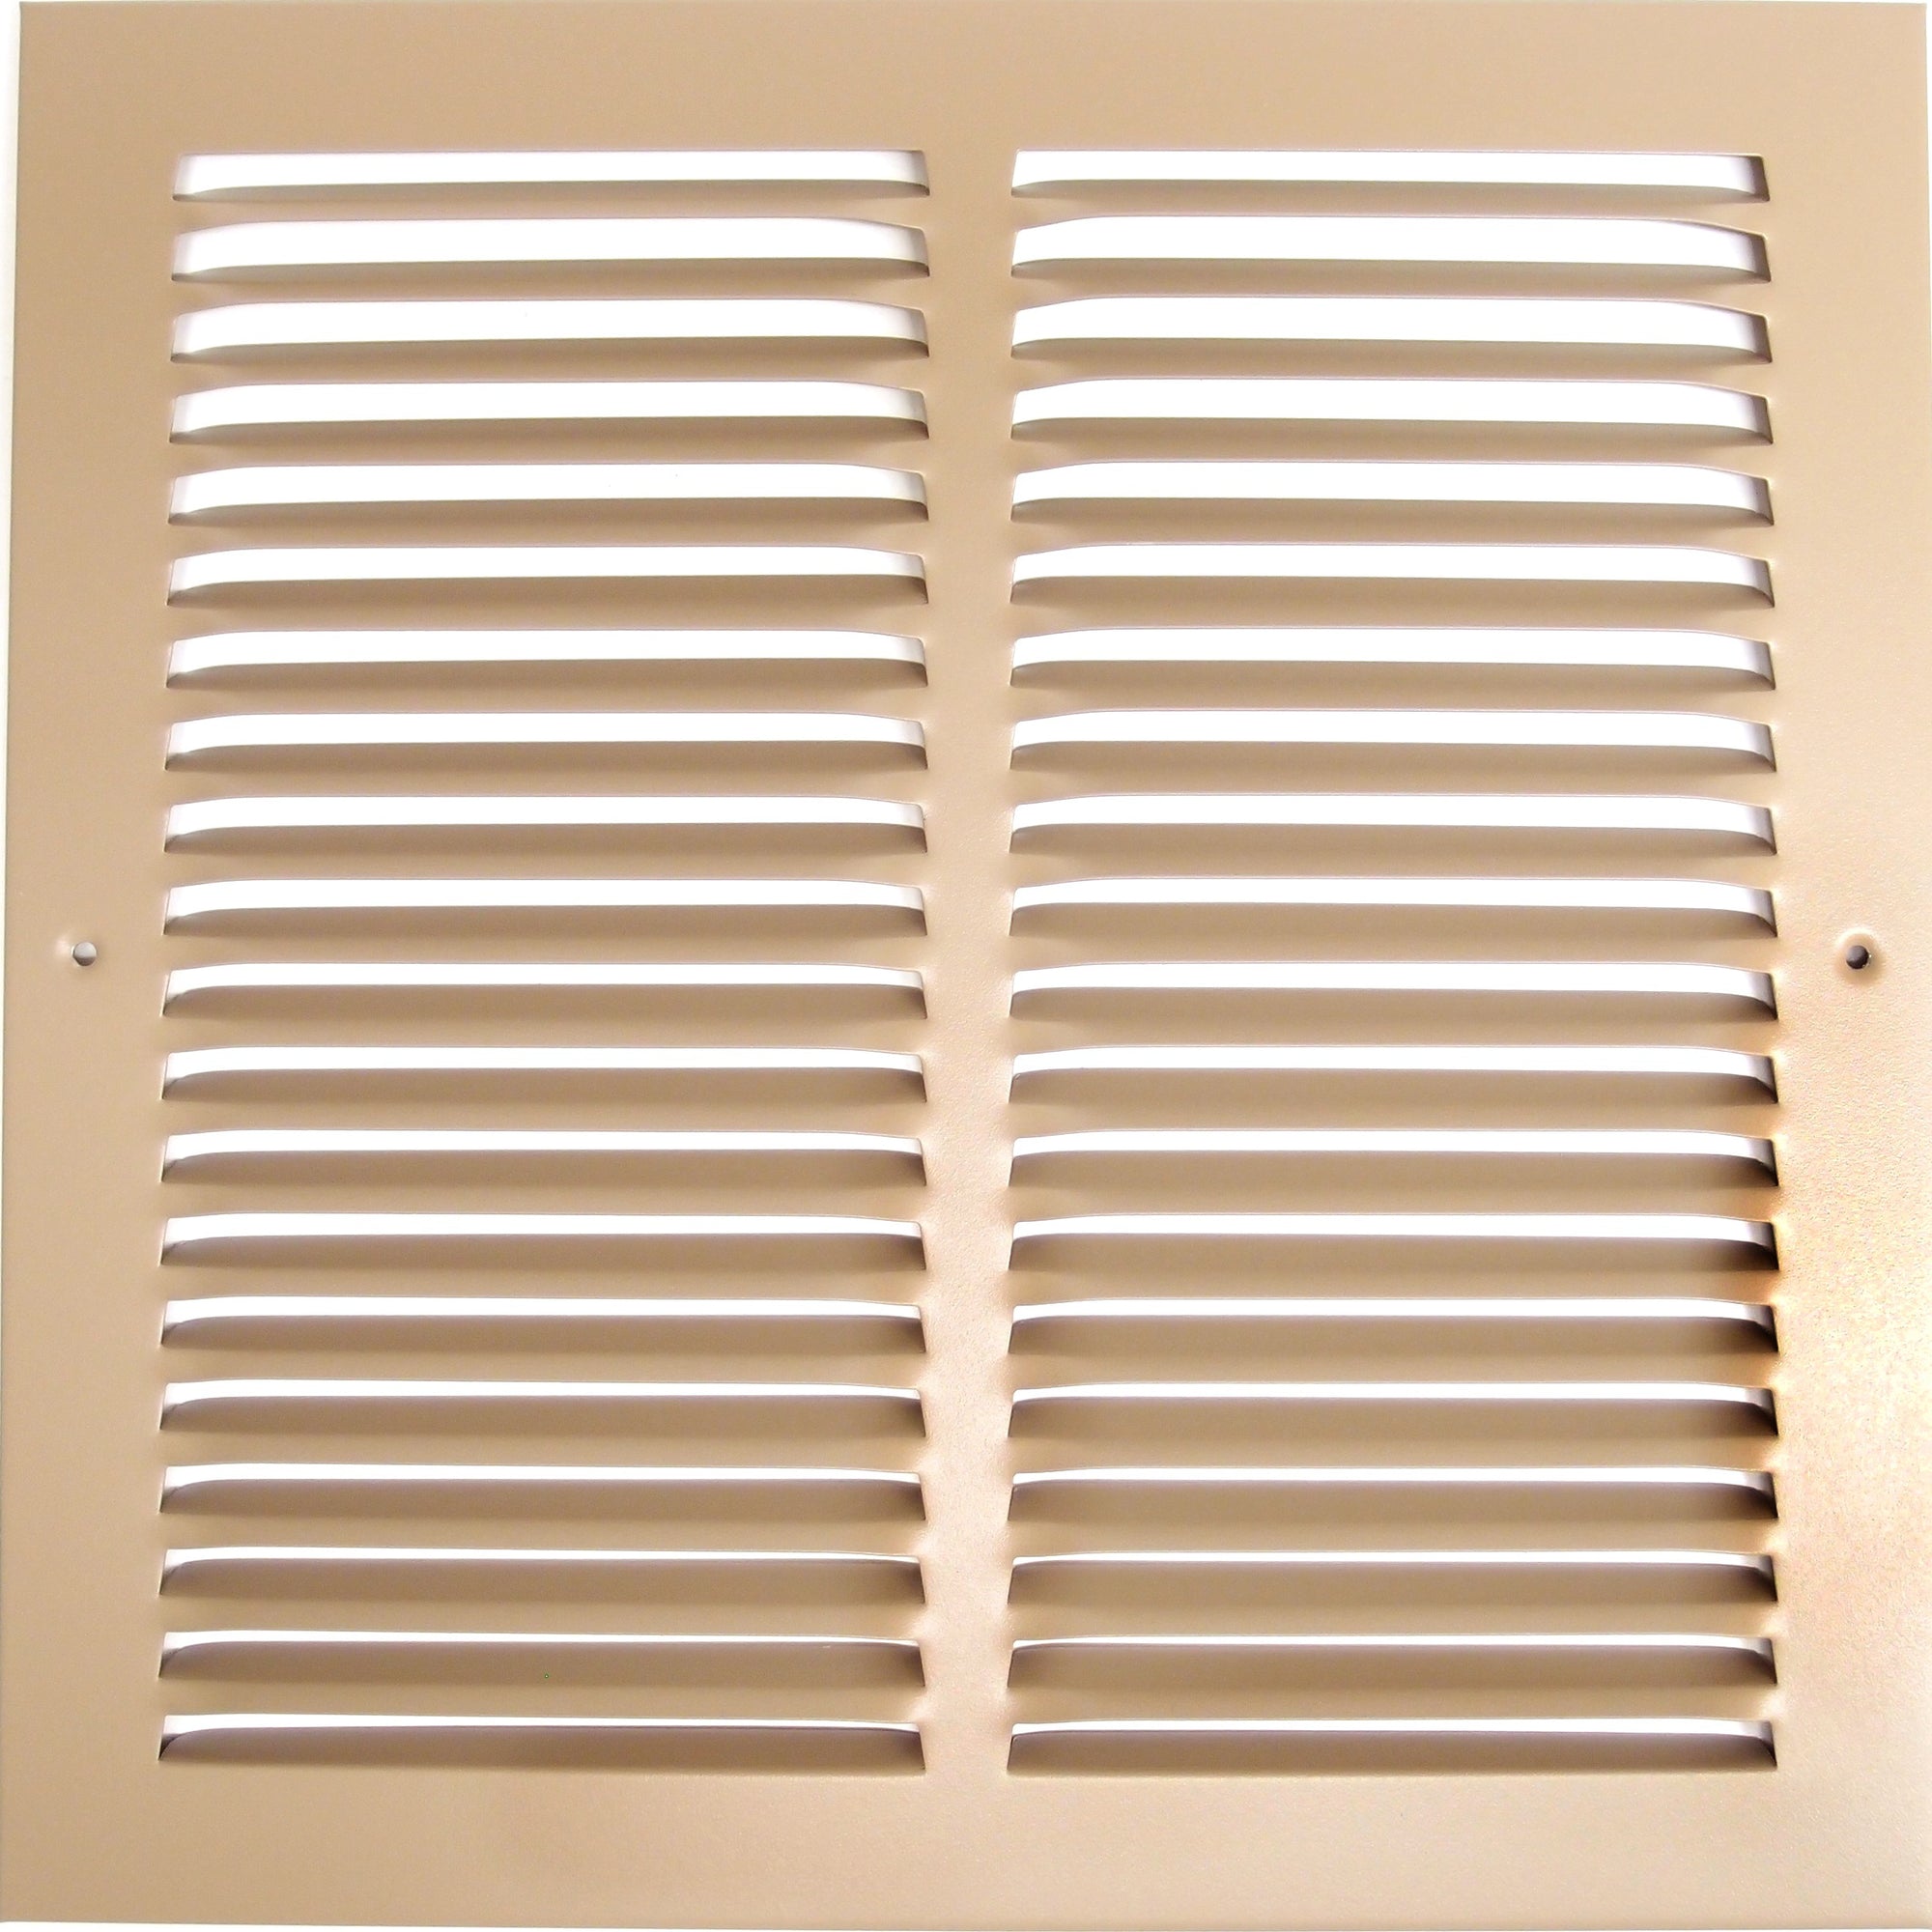 18" X 30" Air Vent Return Grilles - Sidewall and Ceiling - Steel